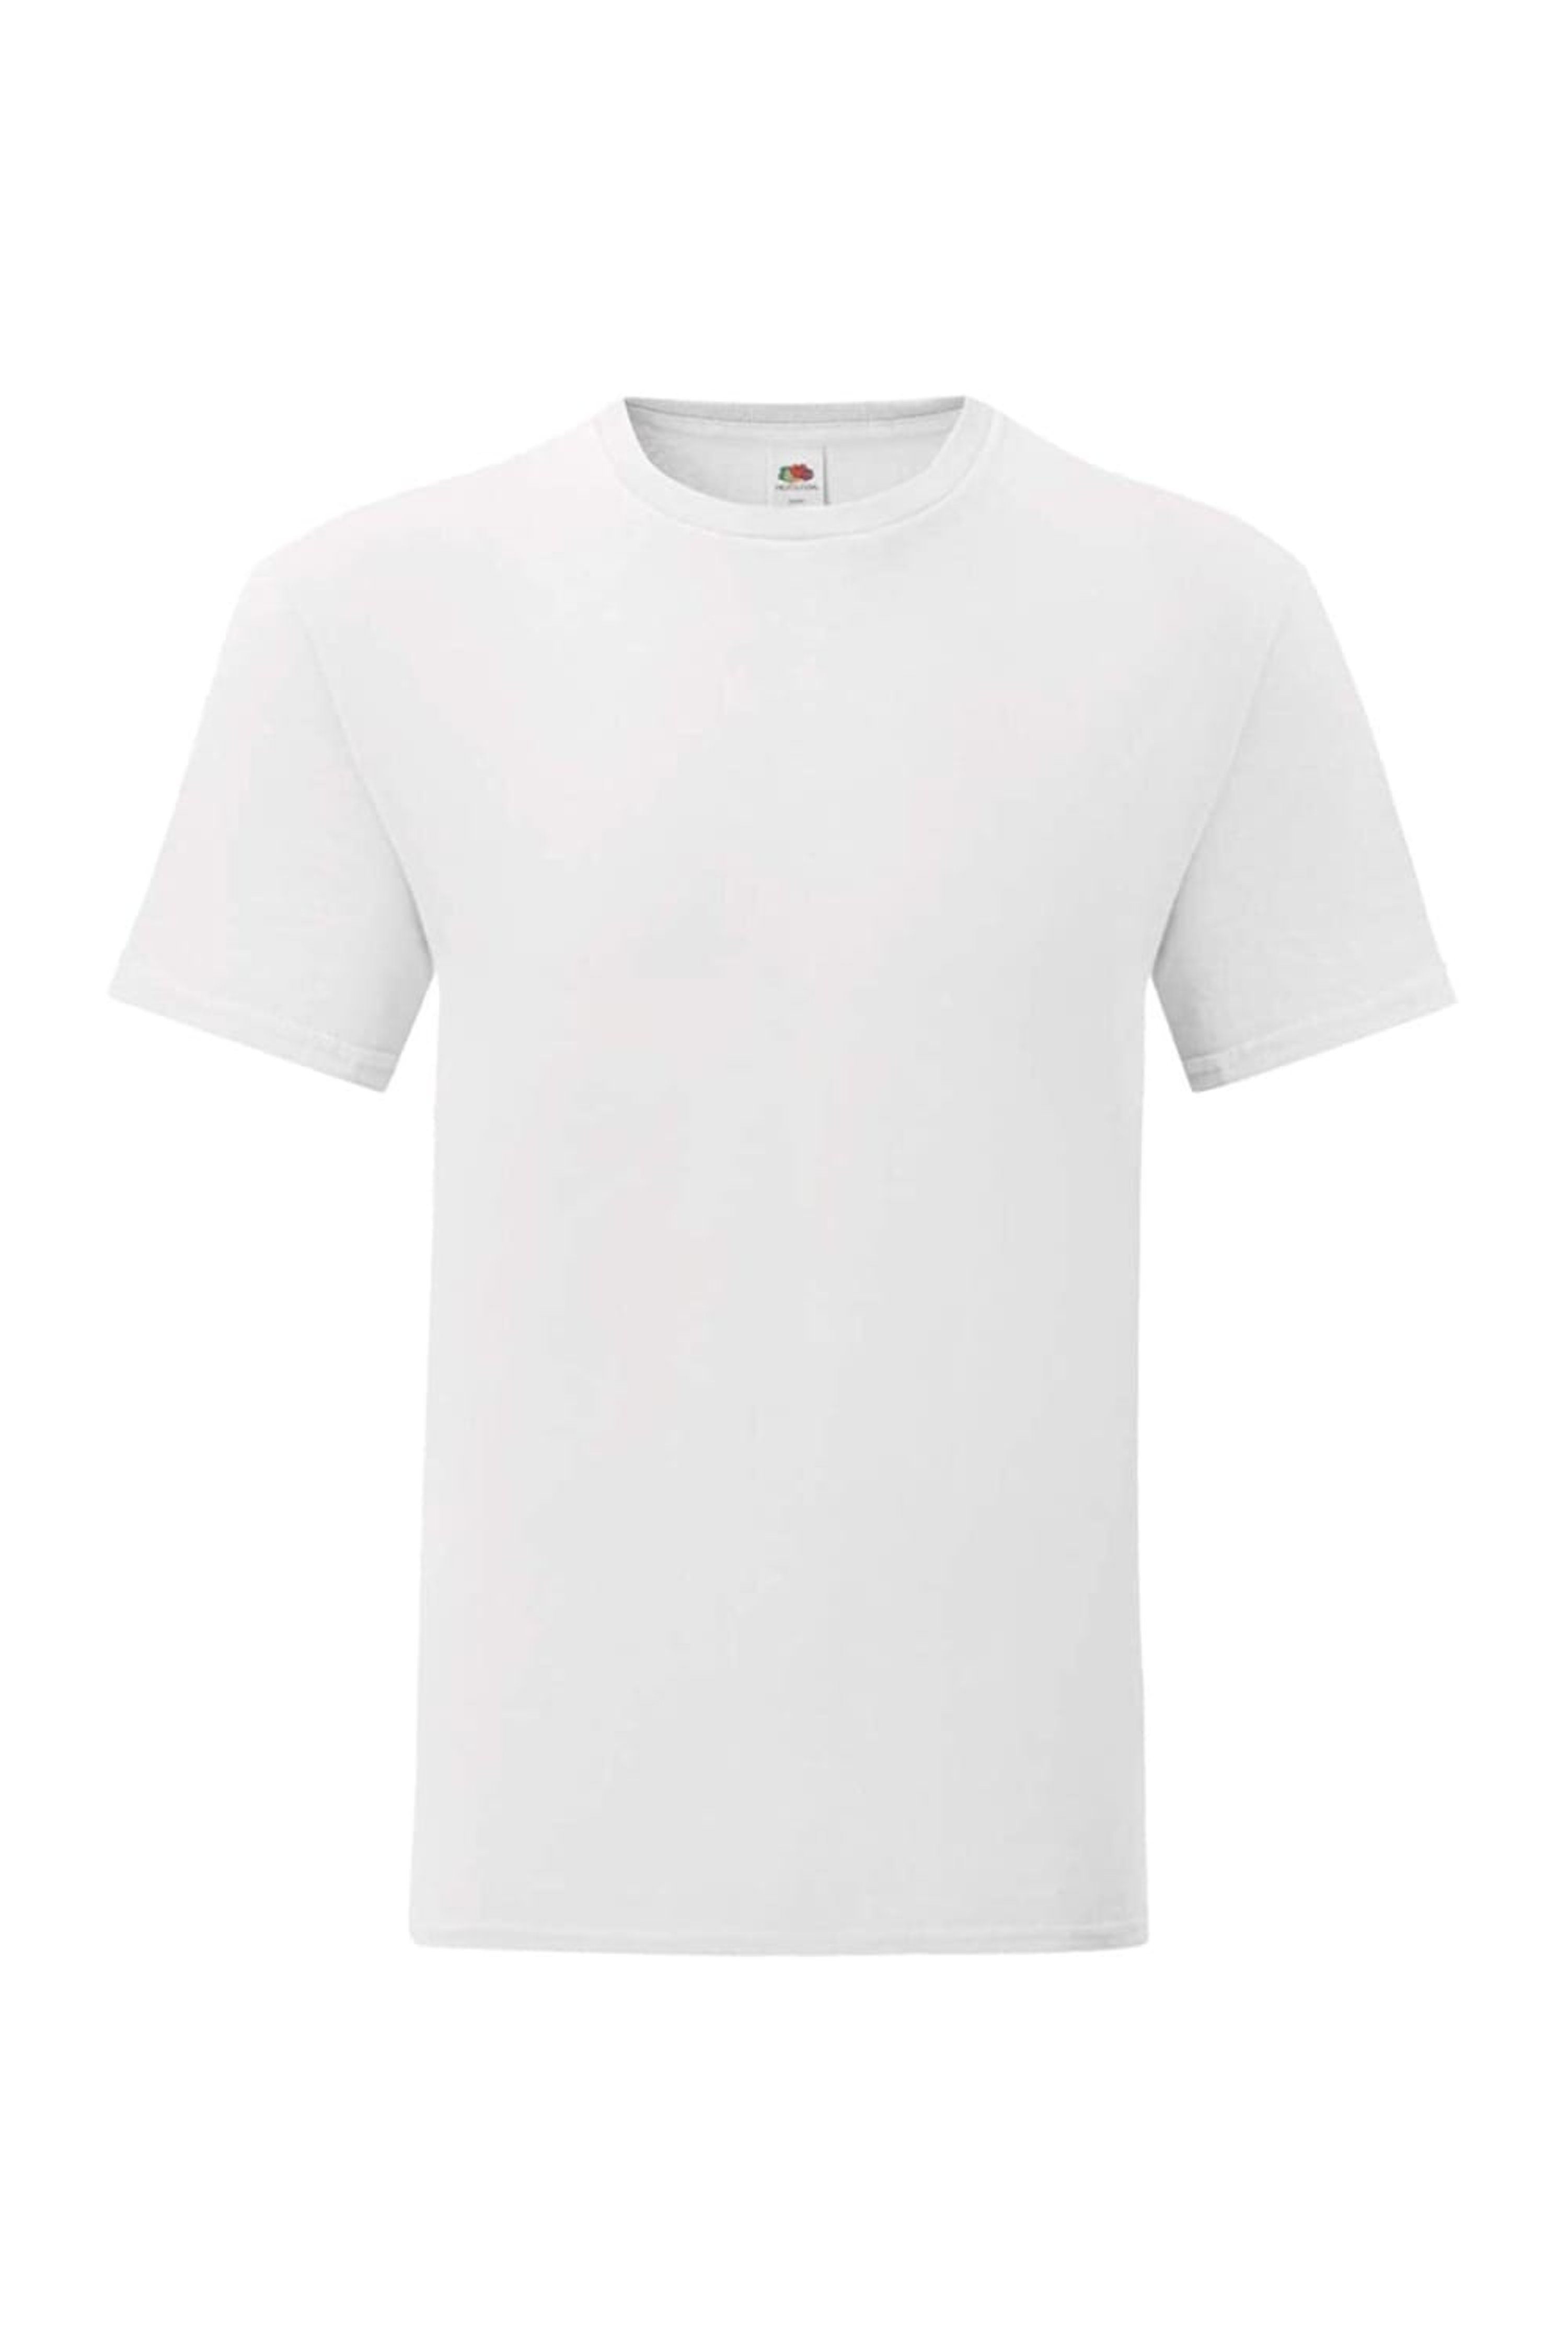 Fruit Of The Loom Mens Iconic Classic T-Shirt (White) - M - Also in: 4XL, 3XL, S, 5XL | Verishop